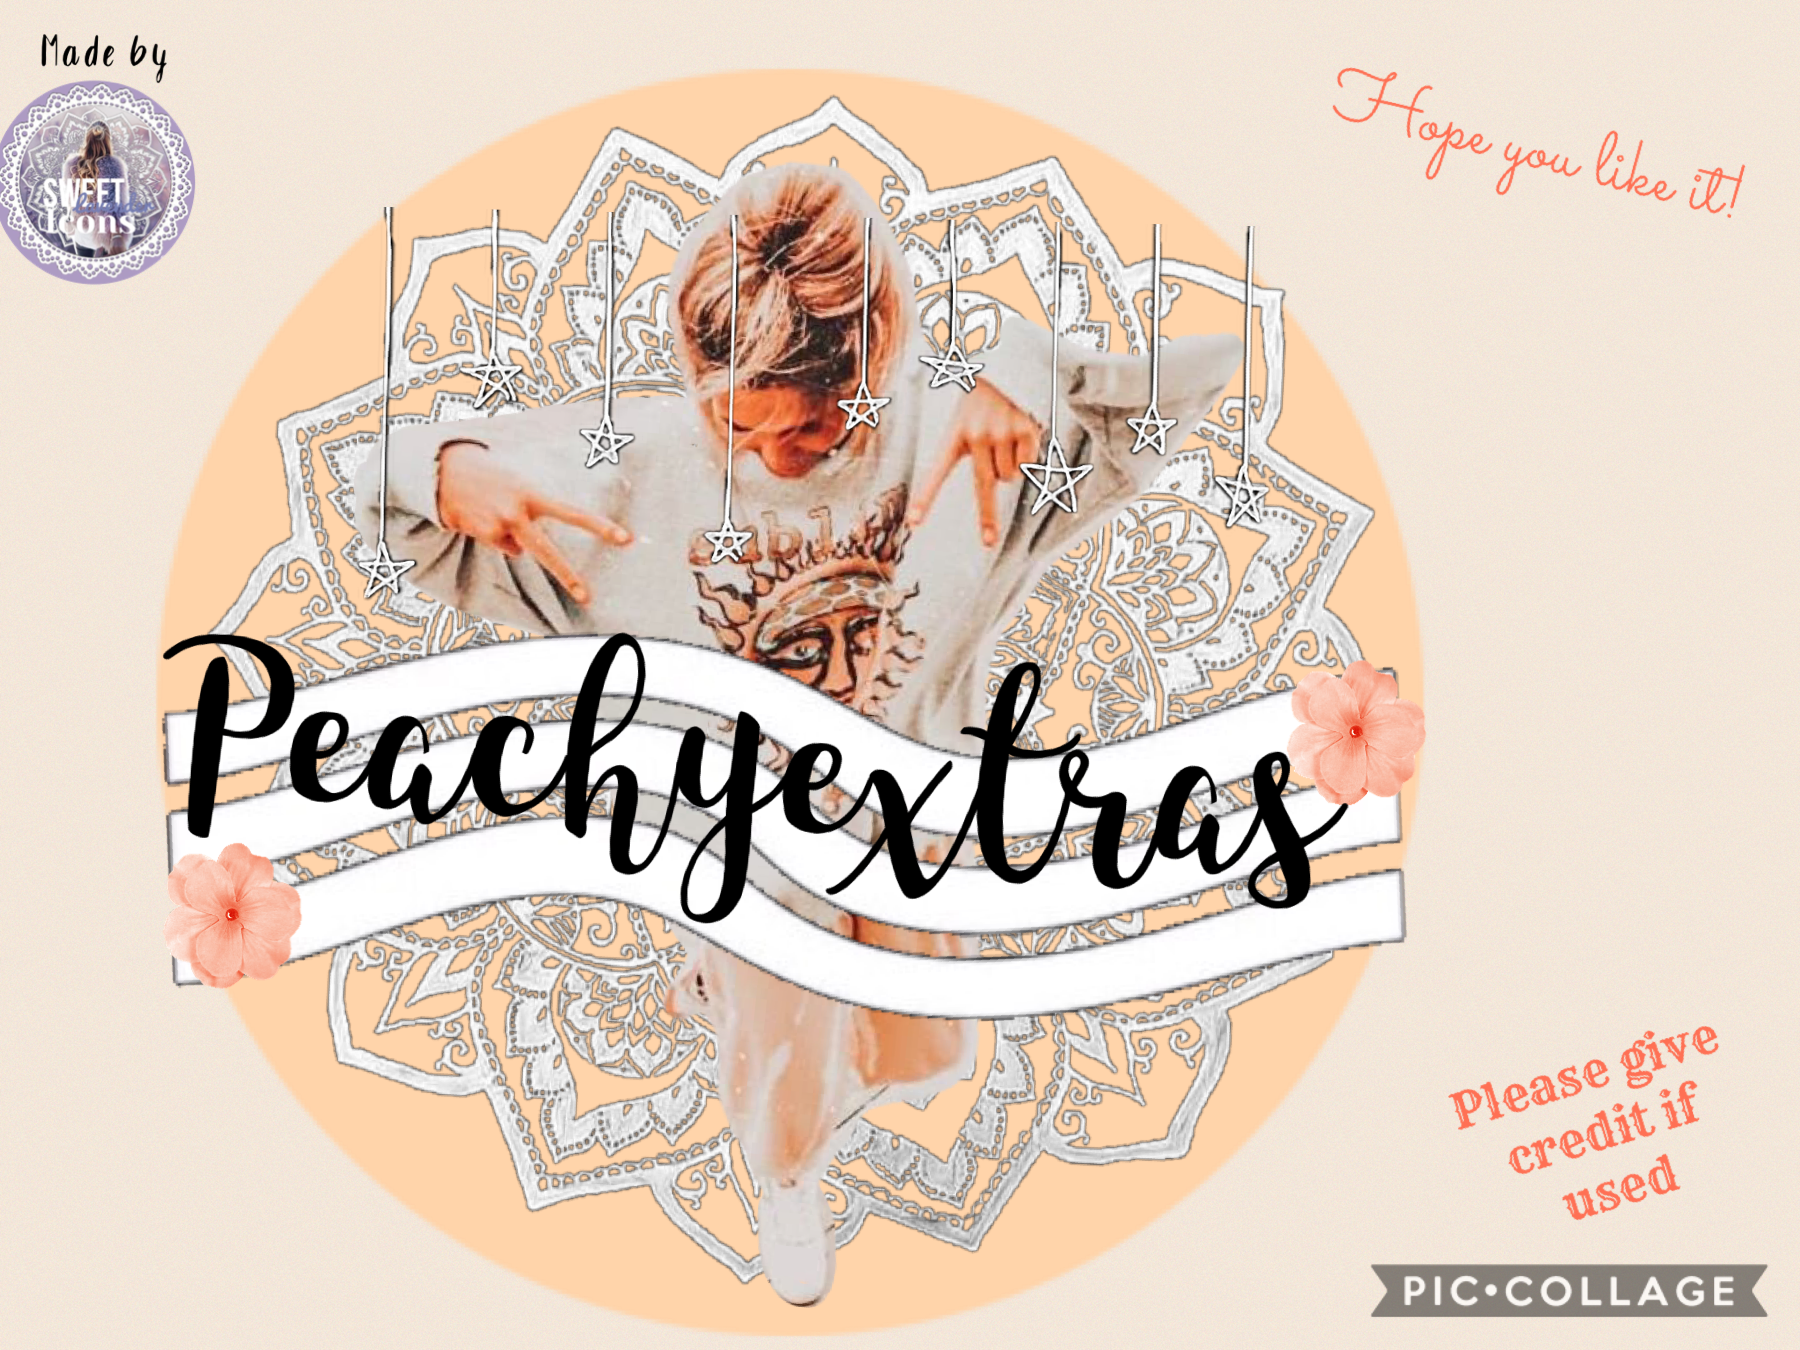 Icon for peachyextras! Hope you like it! Please give credit if used!